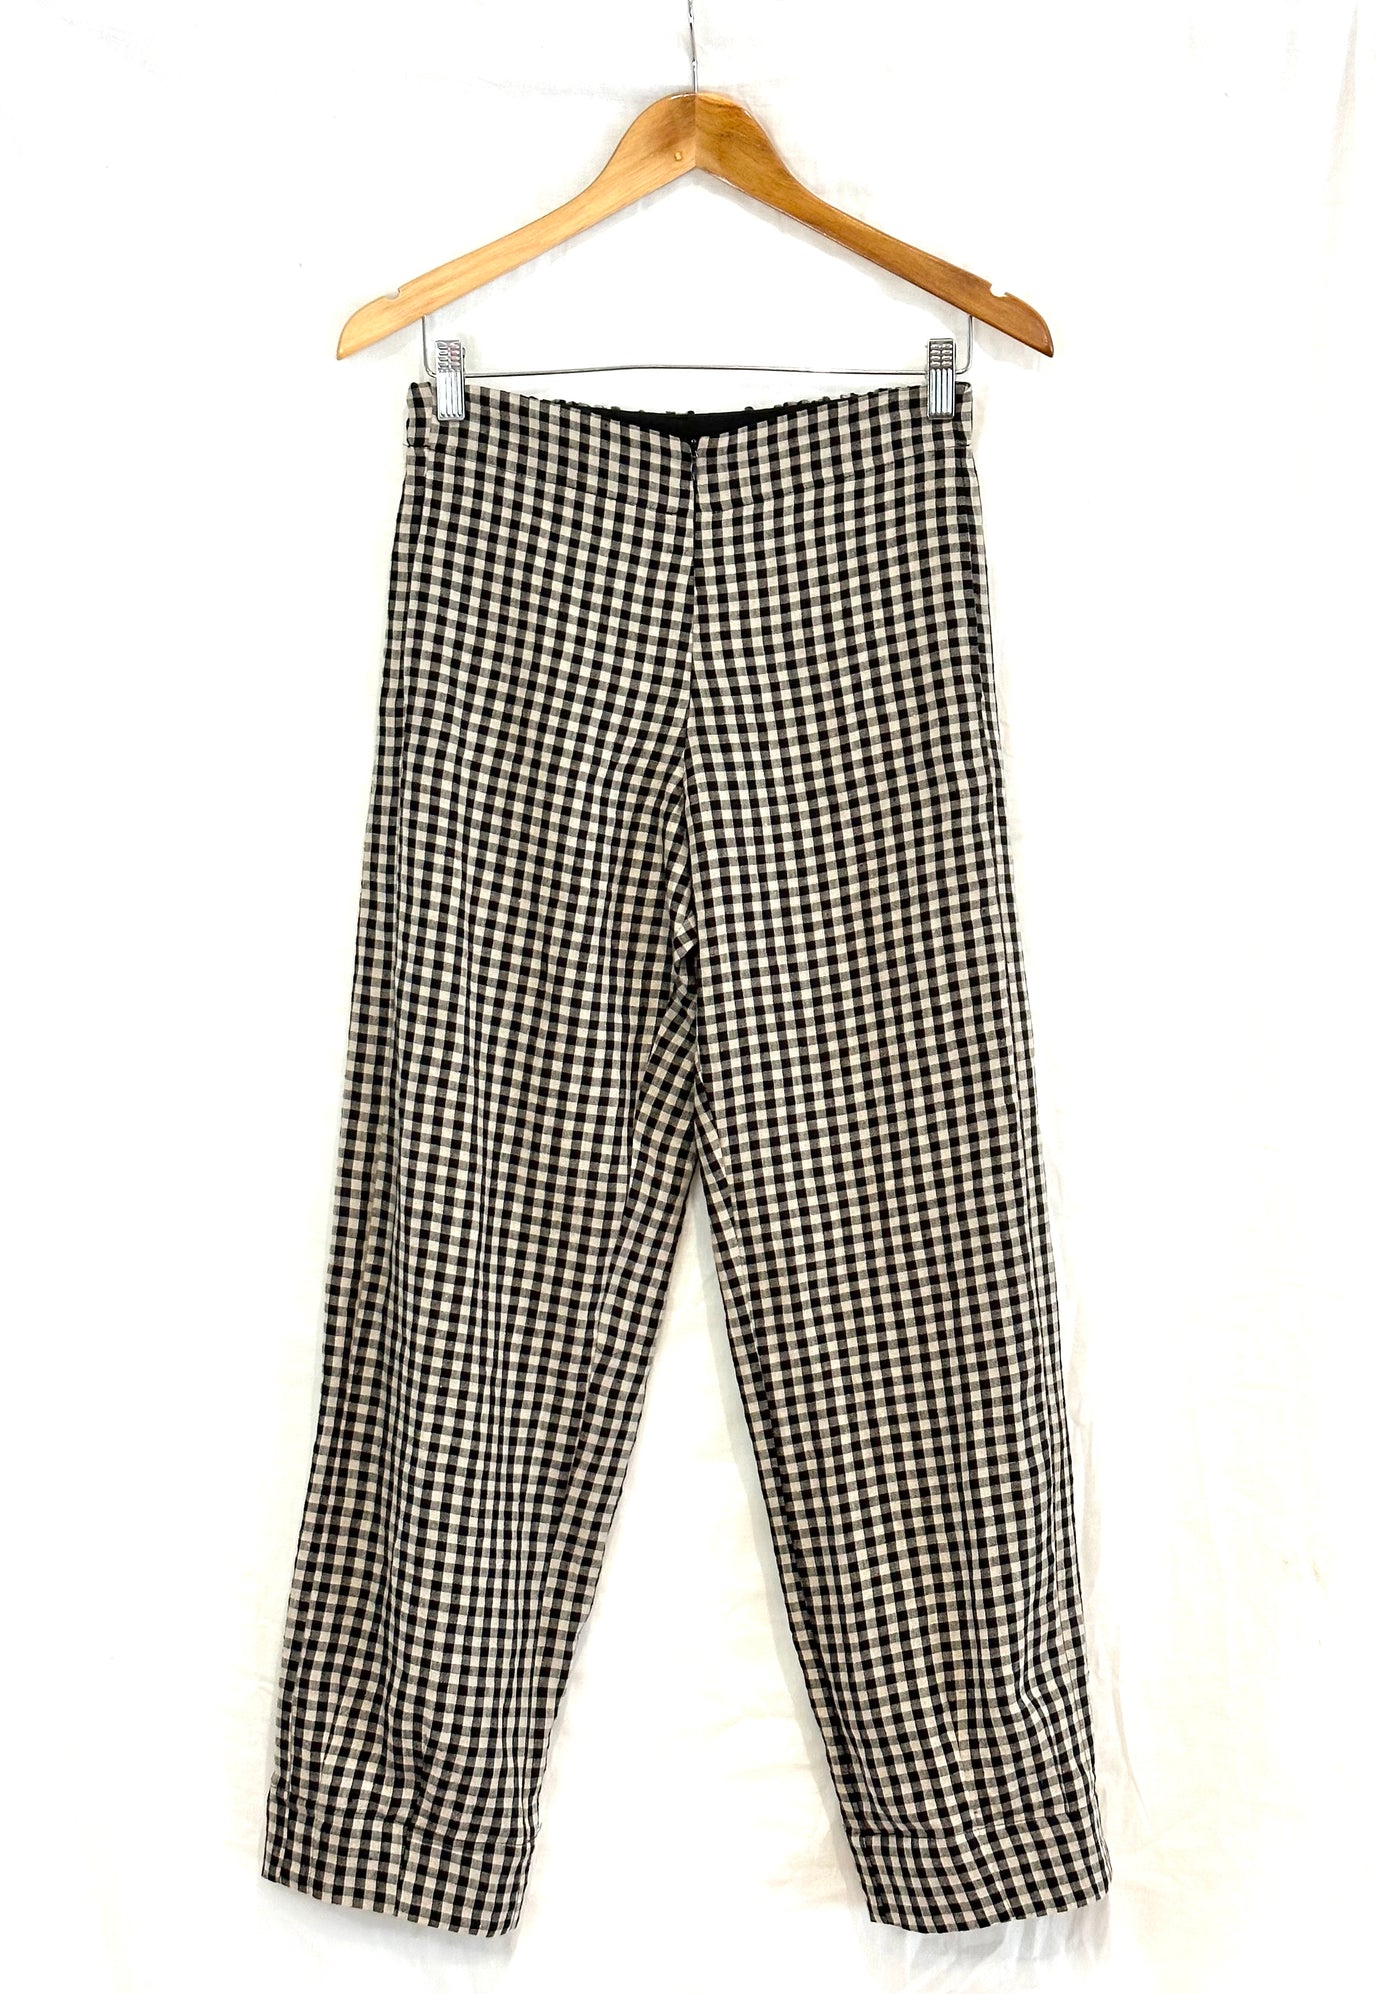 Vale and Ward - Ainsley Pant. Check